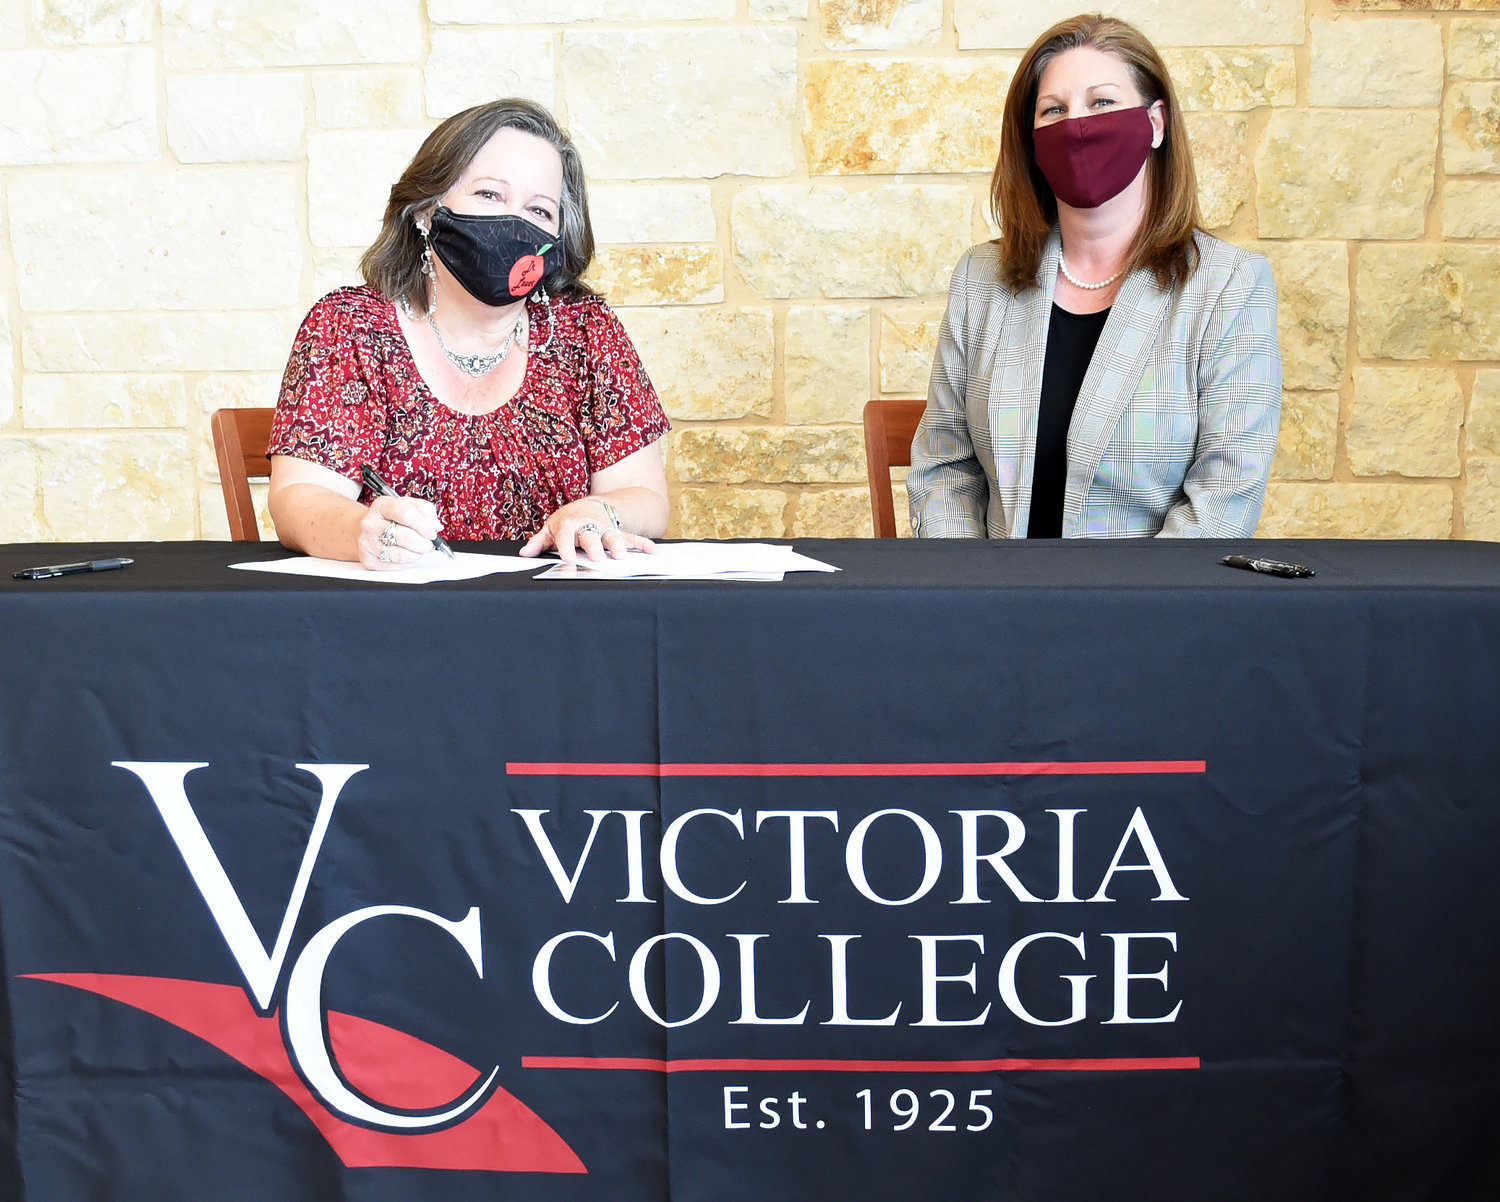 Nixon-Smiley Consolidated Independent School District Superintendent Cathy Lauer, left, and Victoria College President Jennifer Kent recently signed a Memorandum of Understanding concerning dual-enrollment offerings for Nixon-Smiley CISD high school students.